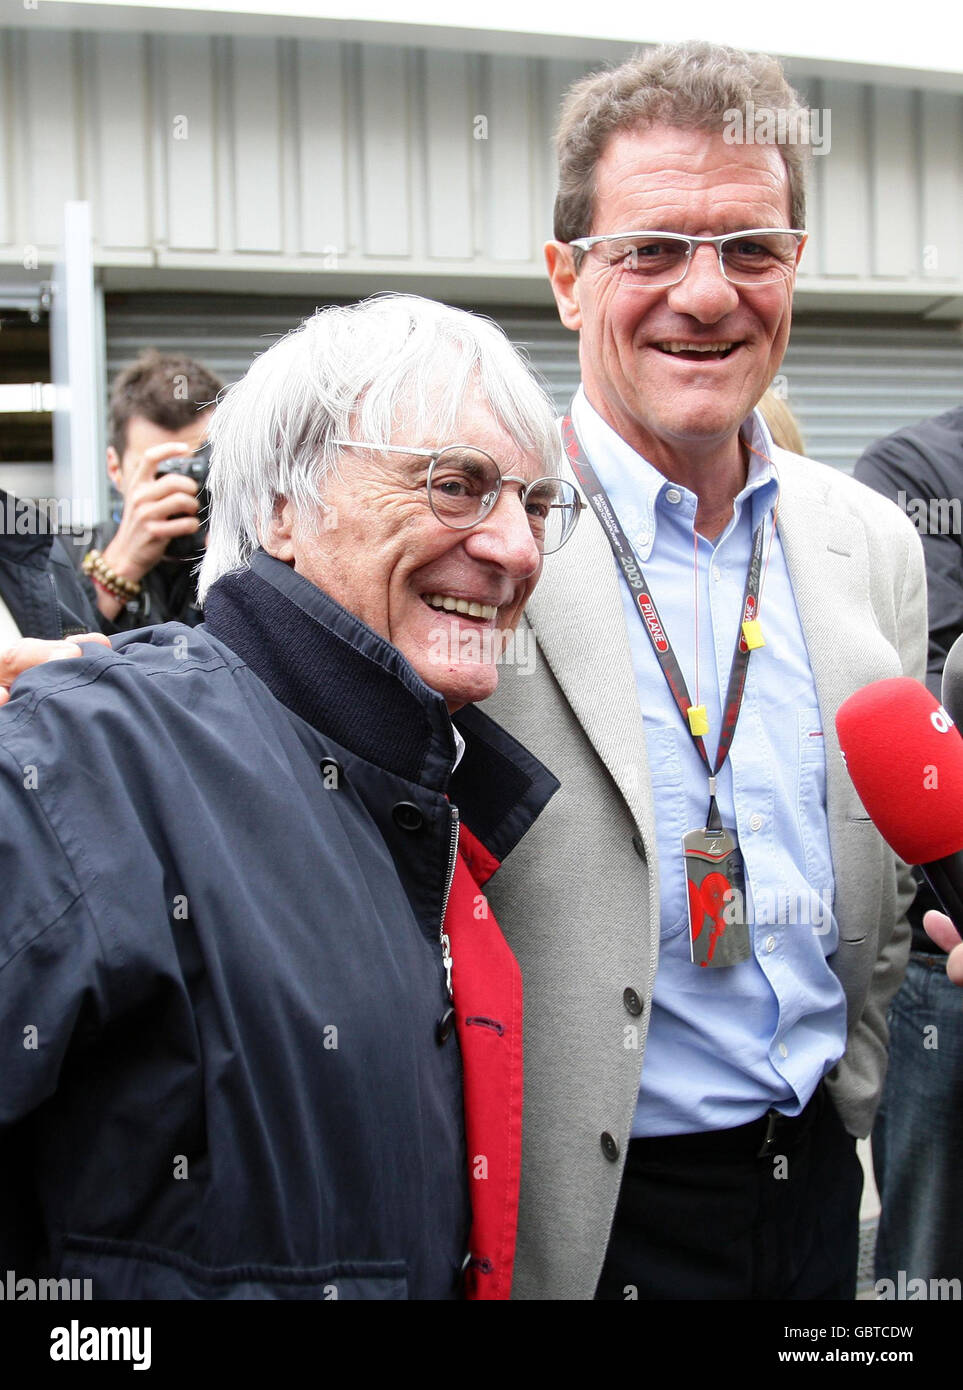 England manager Fabio Capello with President and CEO of Formula One Bernie Ecclestone (right) in the paddock during the practice session at Silverstone, Northamptonshire. Stock Photo